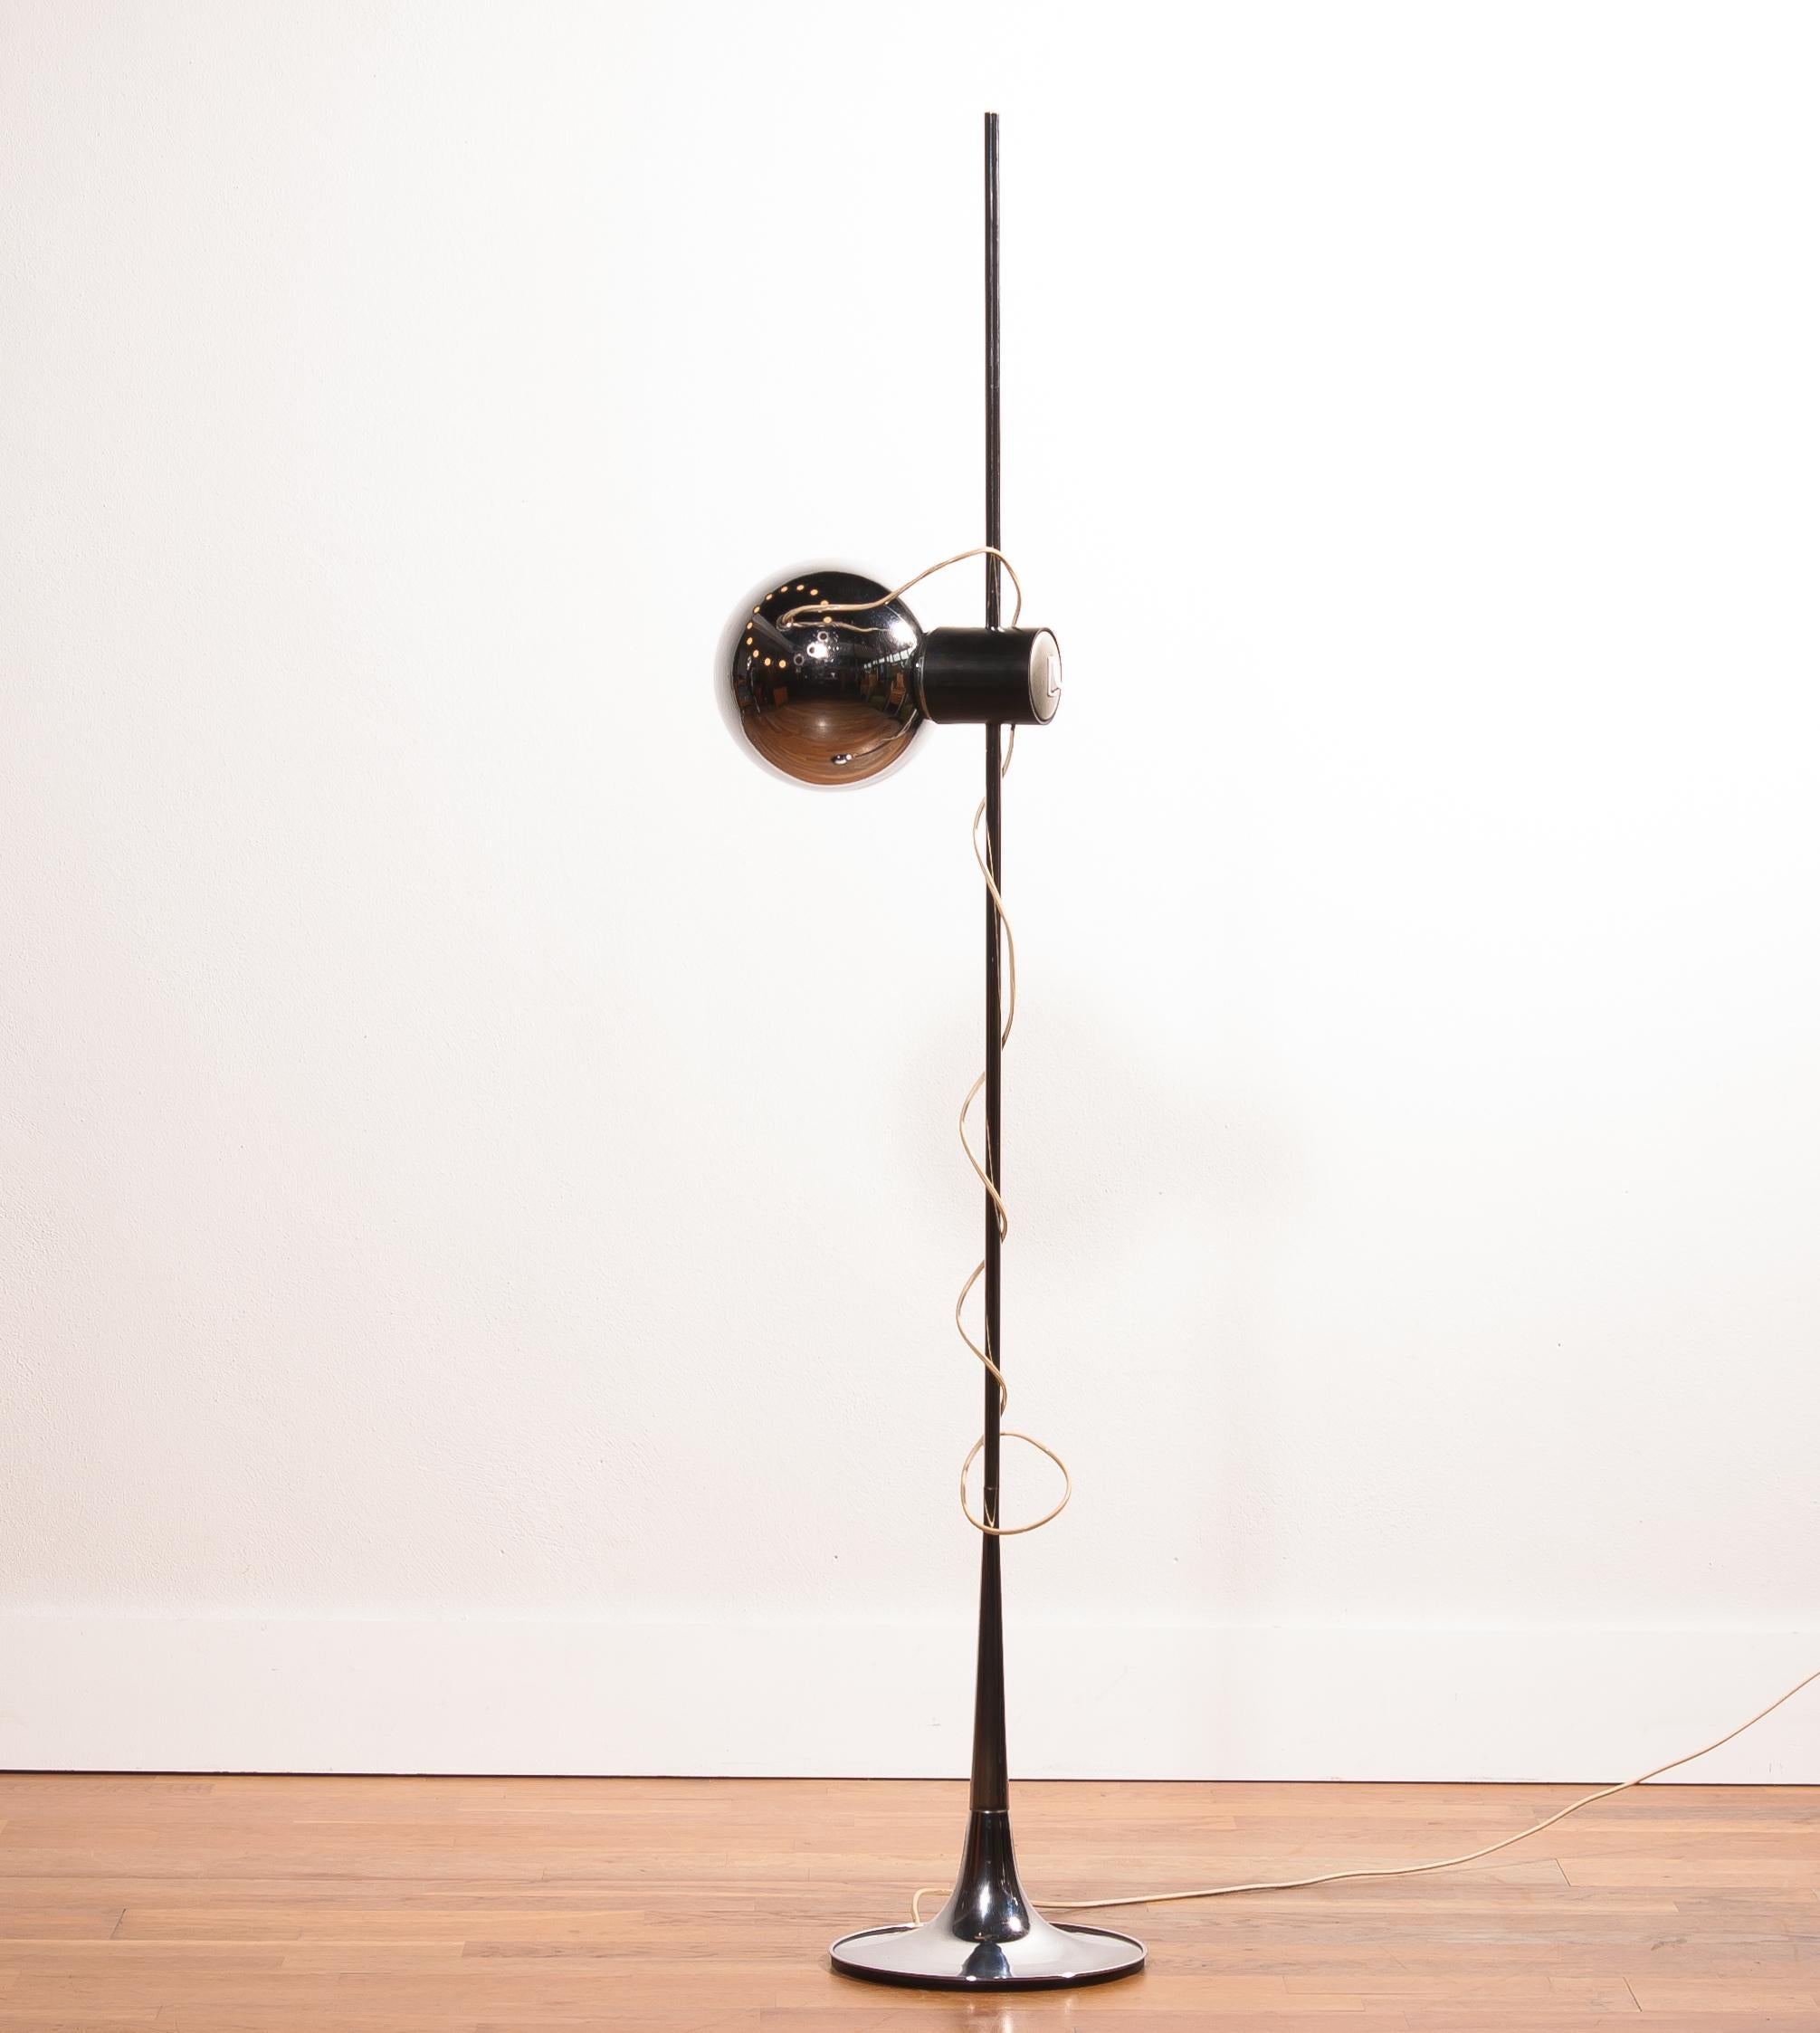 Beautiful floor lamp designed by Reggiani Lampadari, Italy.
The lampshade slide up and down the stem.
It can be rotated in any position by a magnet system, so it is very multifunctional.
The stand has a beautiful design.
Period